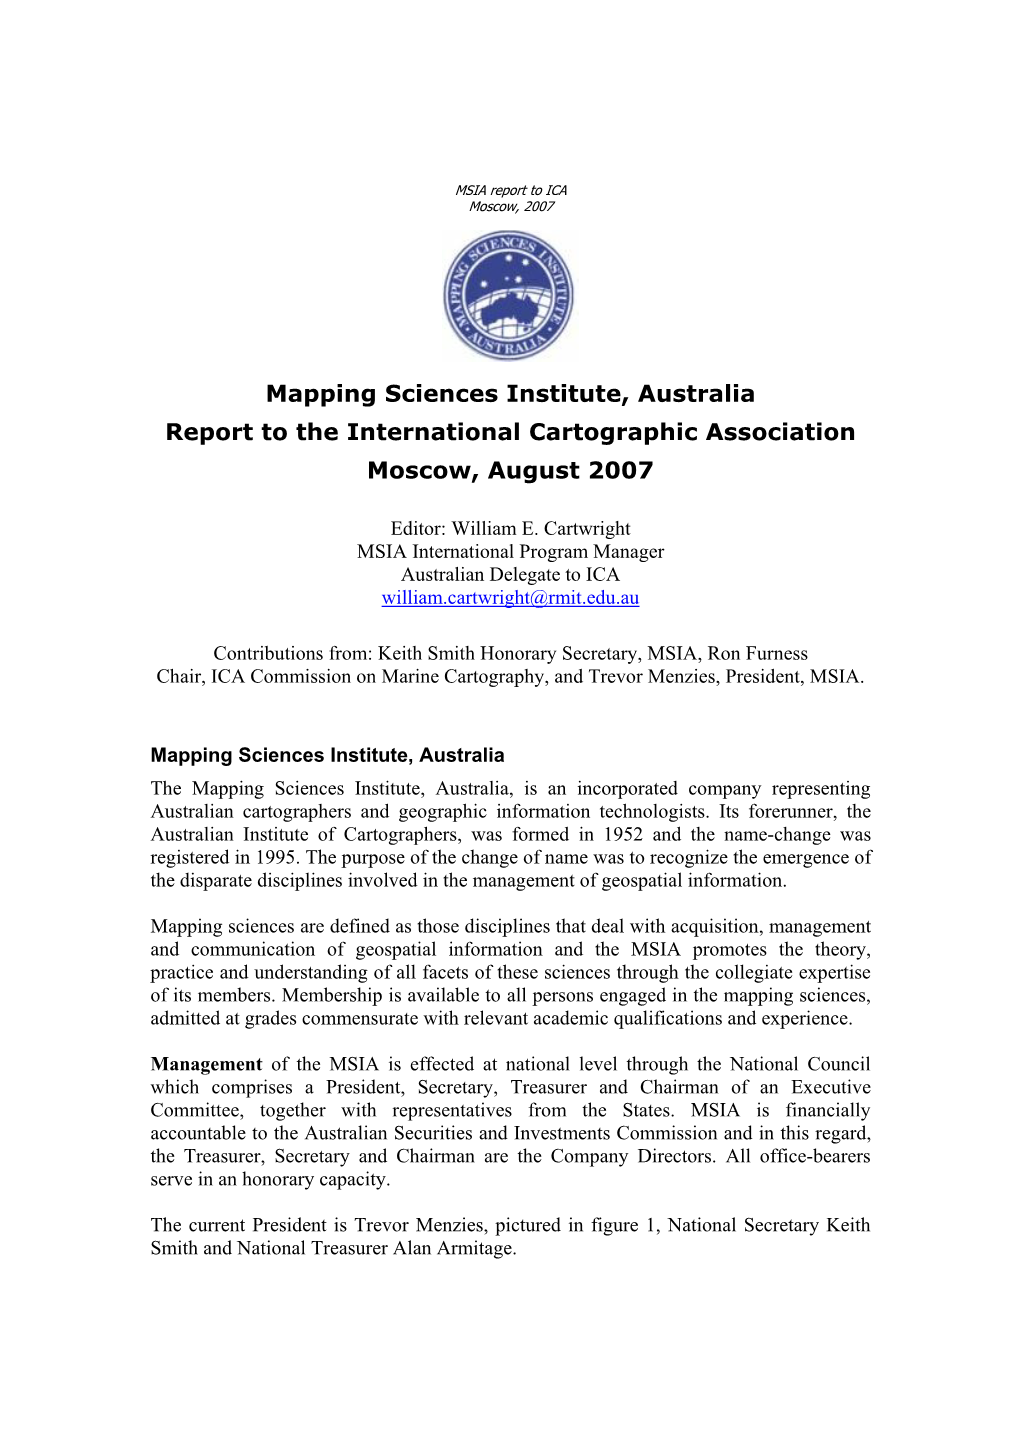 Mapping Sciences Institute, Australia Report to the International Cartographic Association Moscow, August 2007